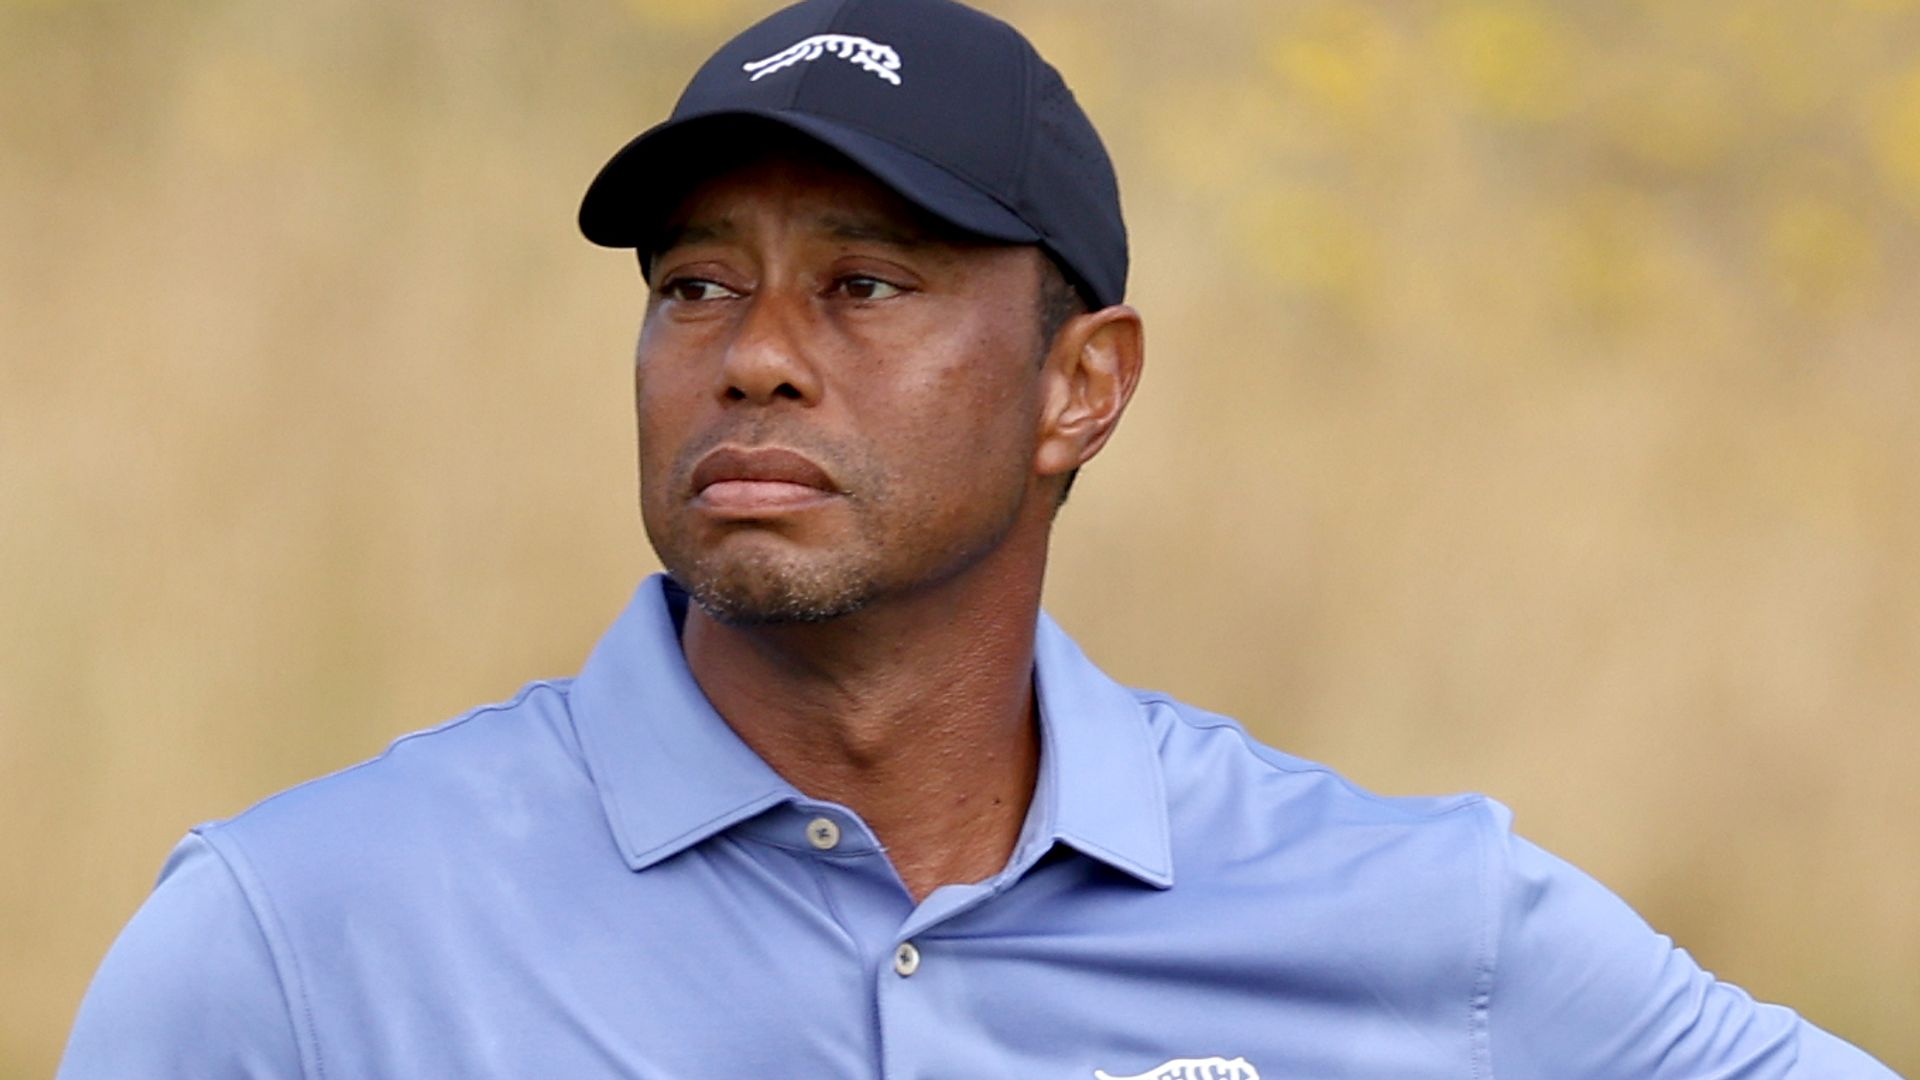 Woods faces late start at The Open; McIlroy grouped with Hatton